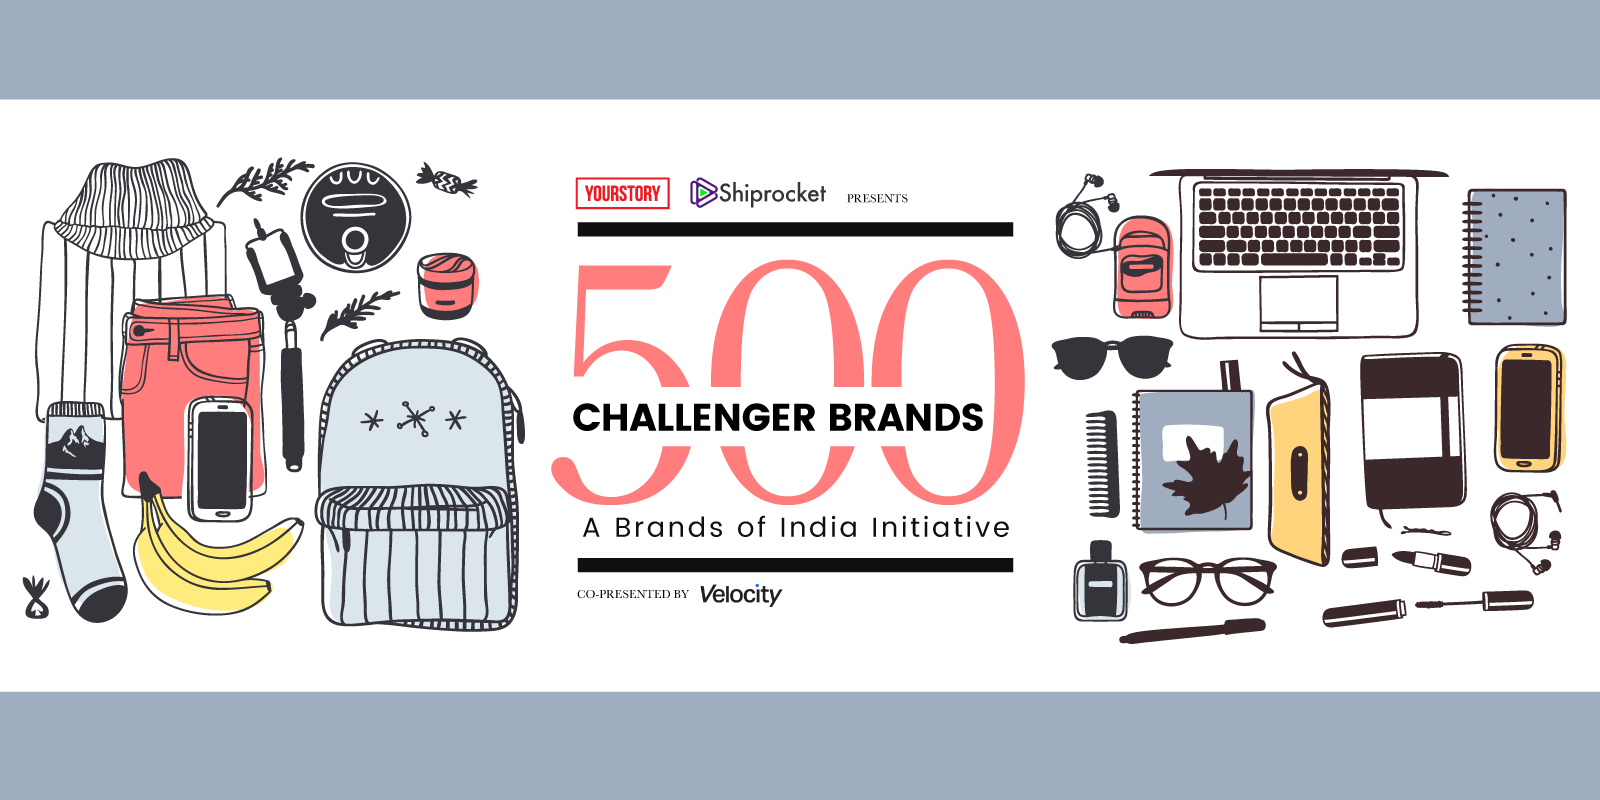 YourStory invites '500 Challenger Brands' to be part of India’s D2C revolution